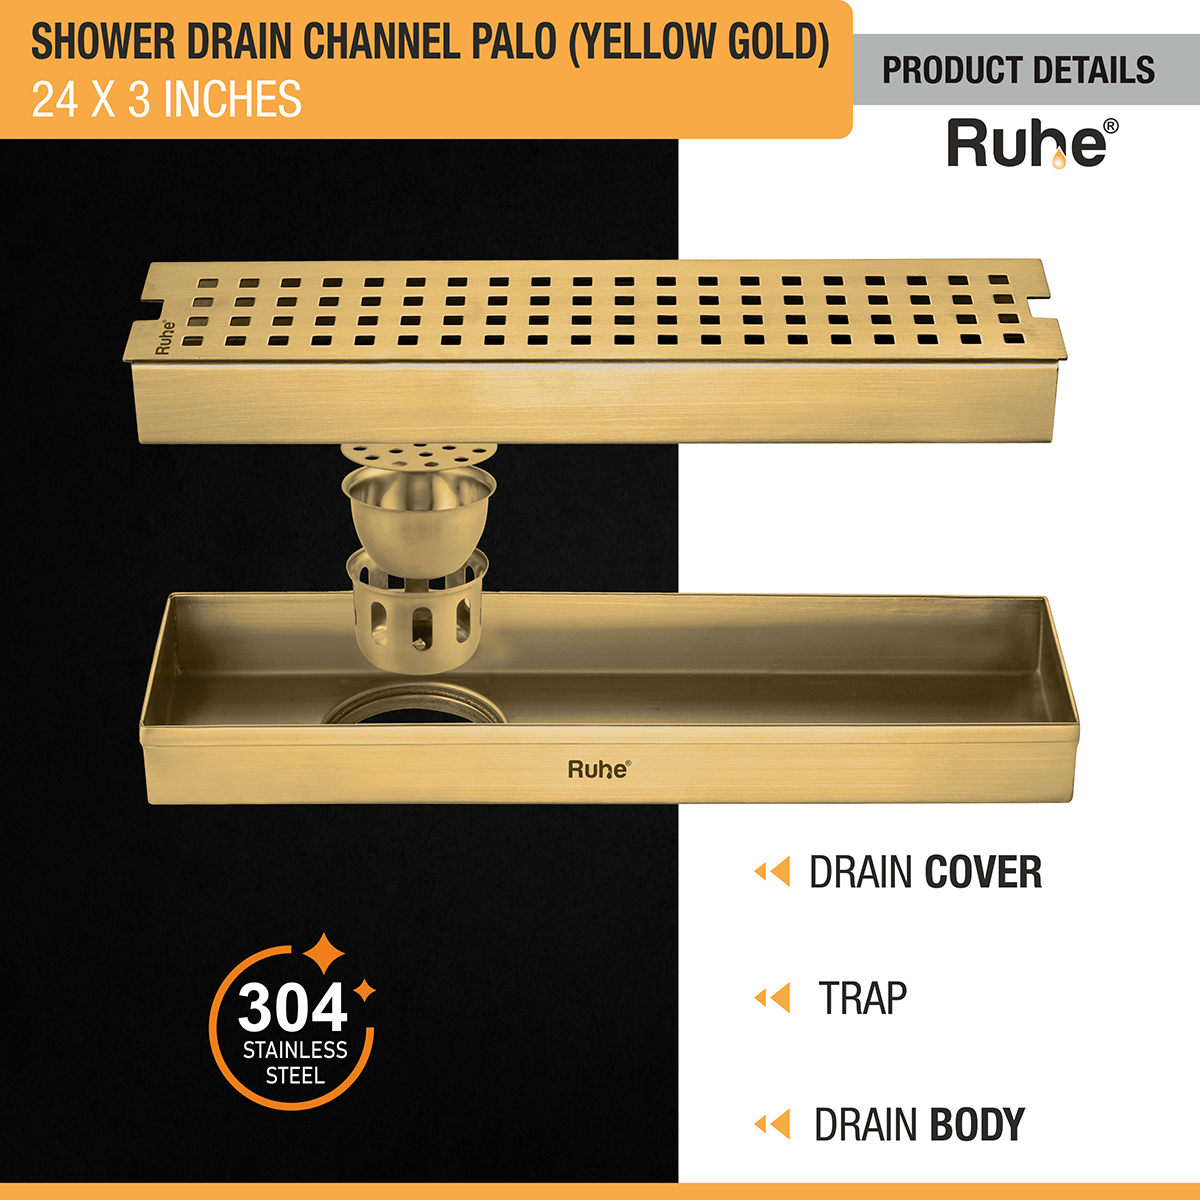 Palo Shower Drain Channel (24 x 3 Inches) YELLOW GOLD product details